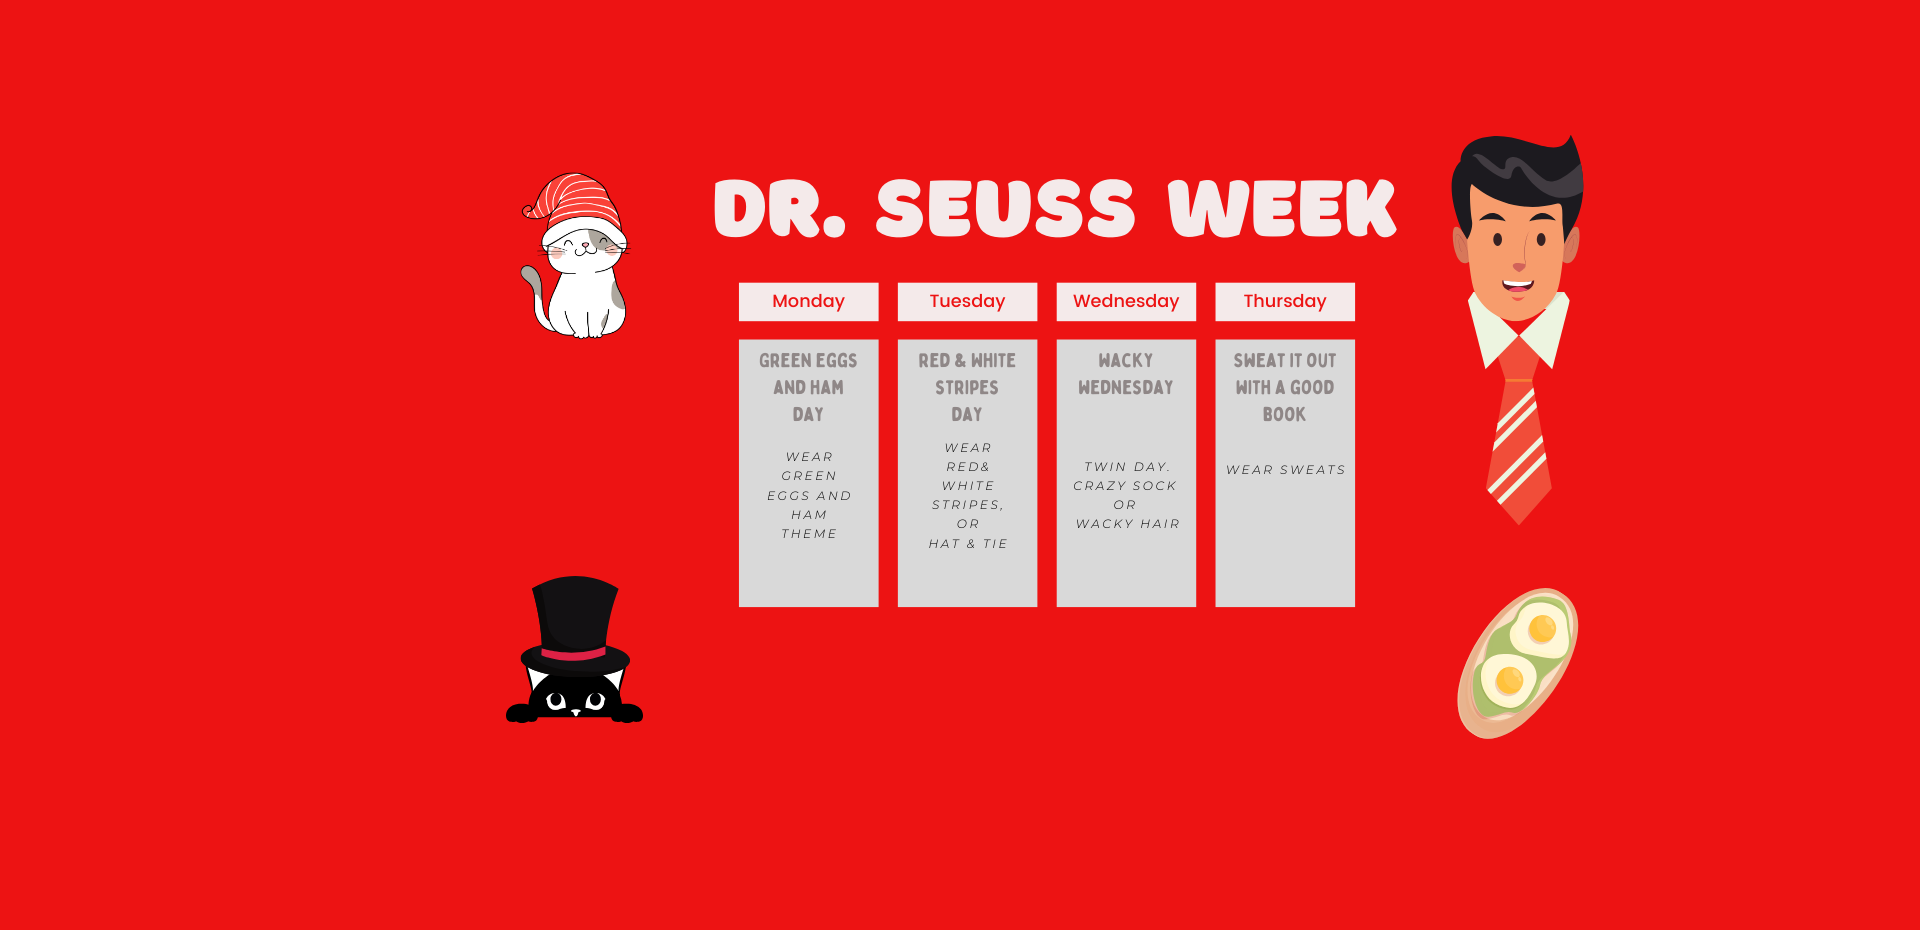 Dress Up Days for the week